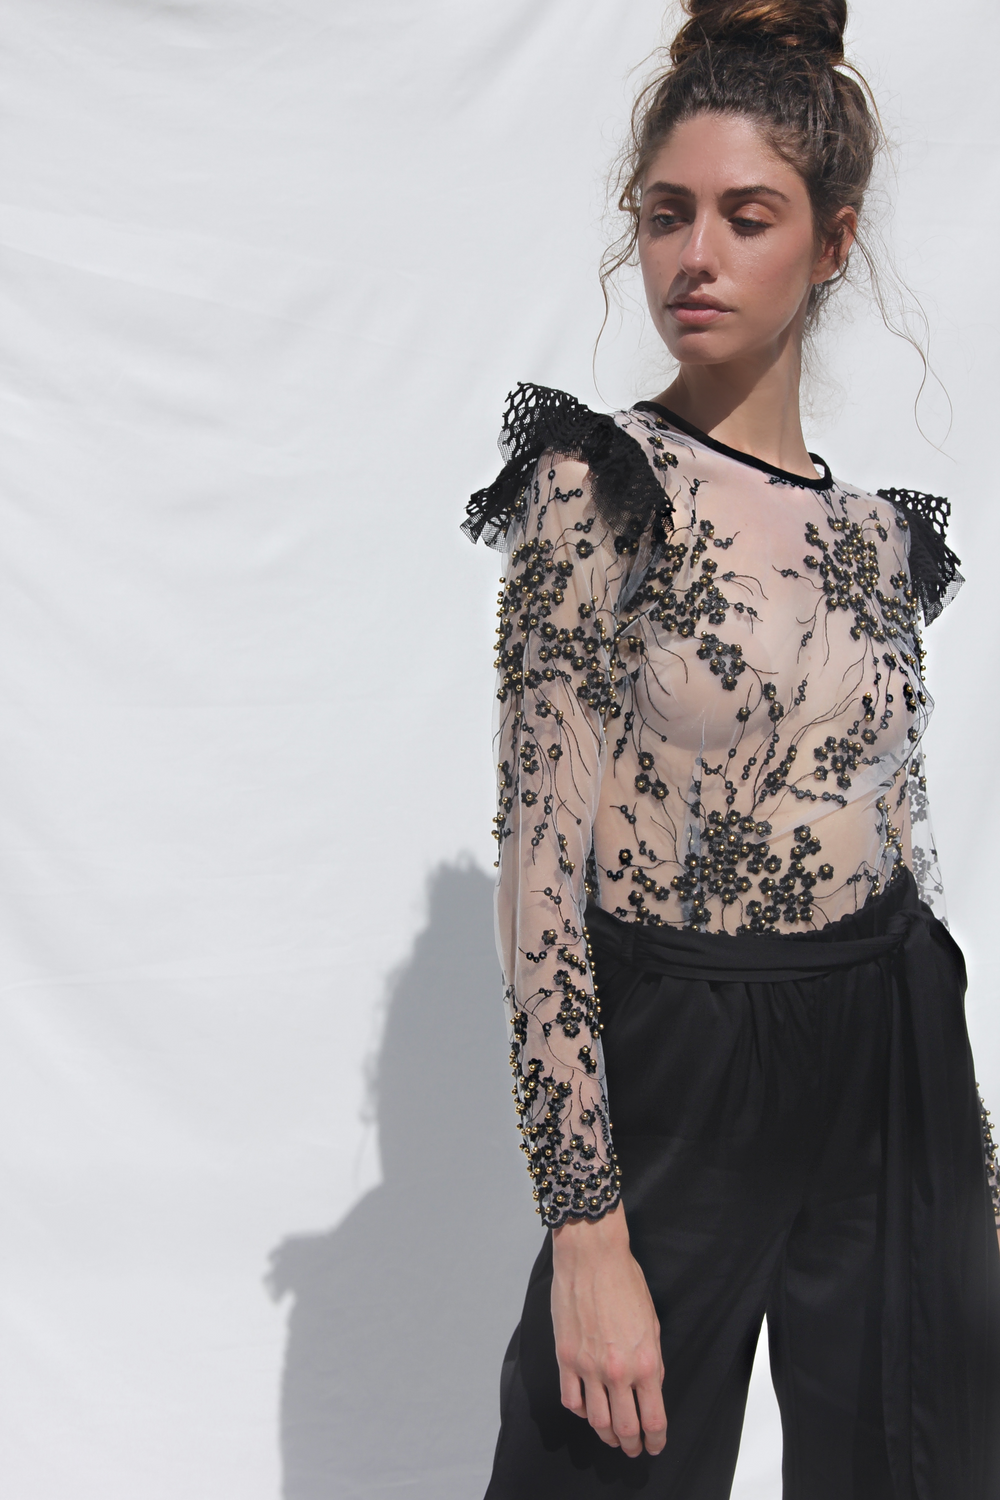 evening, cocktail and special occasion mesh top with embroidery and studs